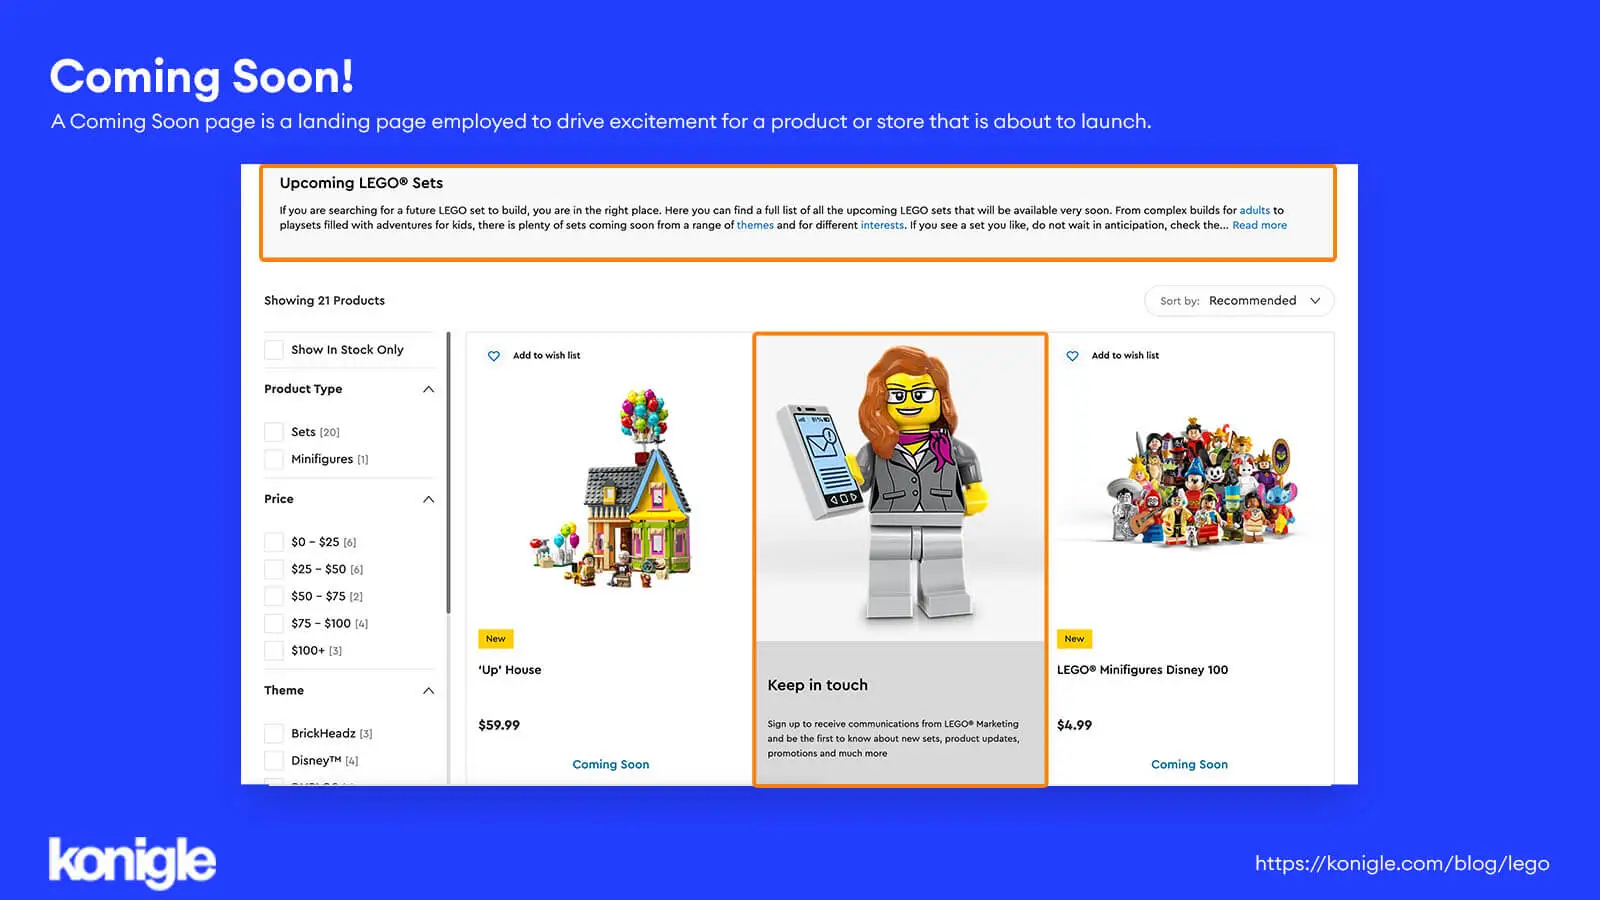 LEGO makes use of their coming soon page to get customers to sign up to their newsletter.